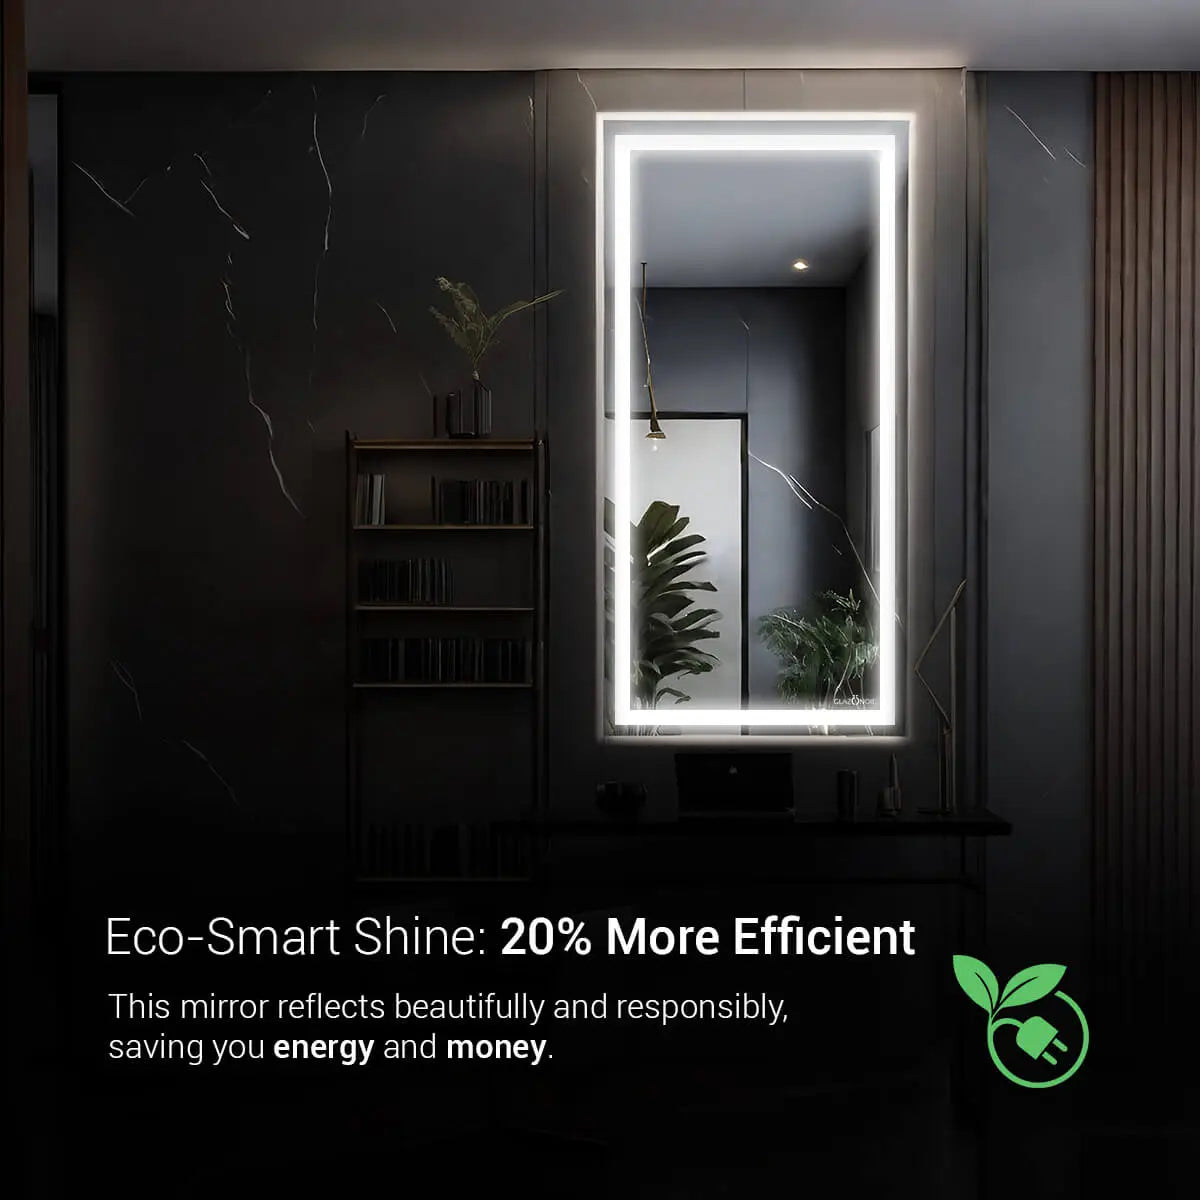 Eco-friendly, full-length LED mirror with a bright white light for clear reflection. This mirror is perfect for a bathroom or bedroom, and it will help you save energy and money. The mirror has a bright light that is perfect for applying makeup or shaving.